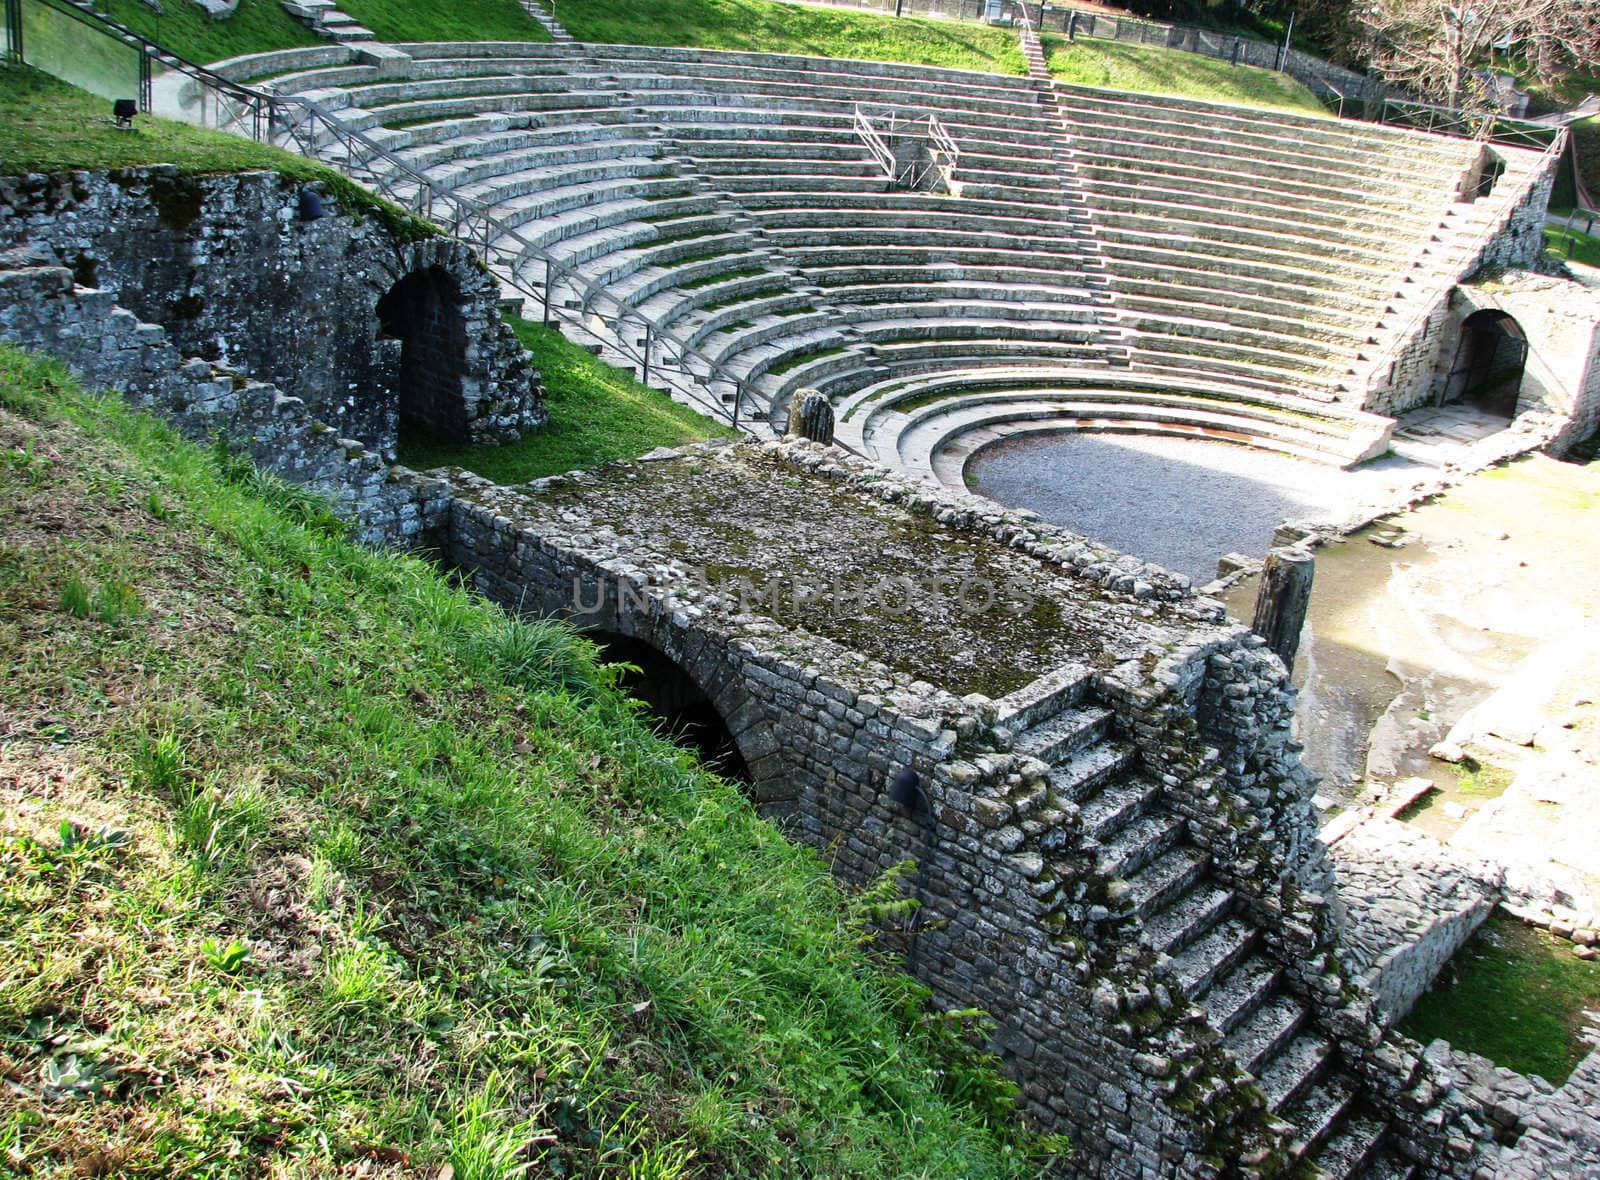 An ancient Roman amphitheater in Fiesole, Italy.